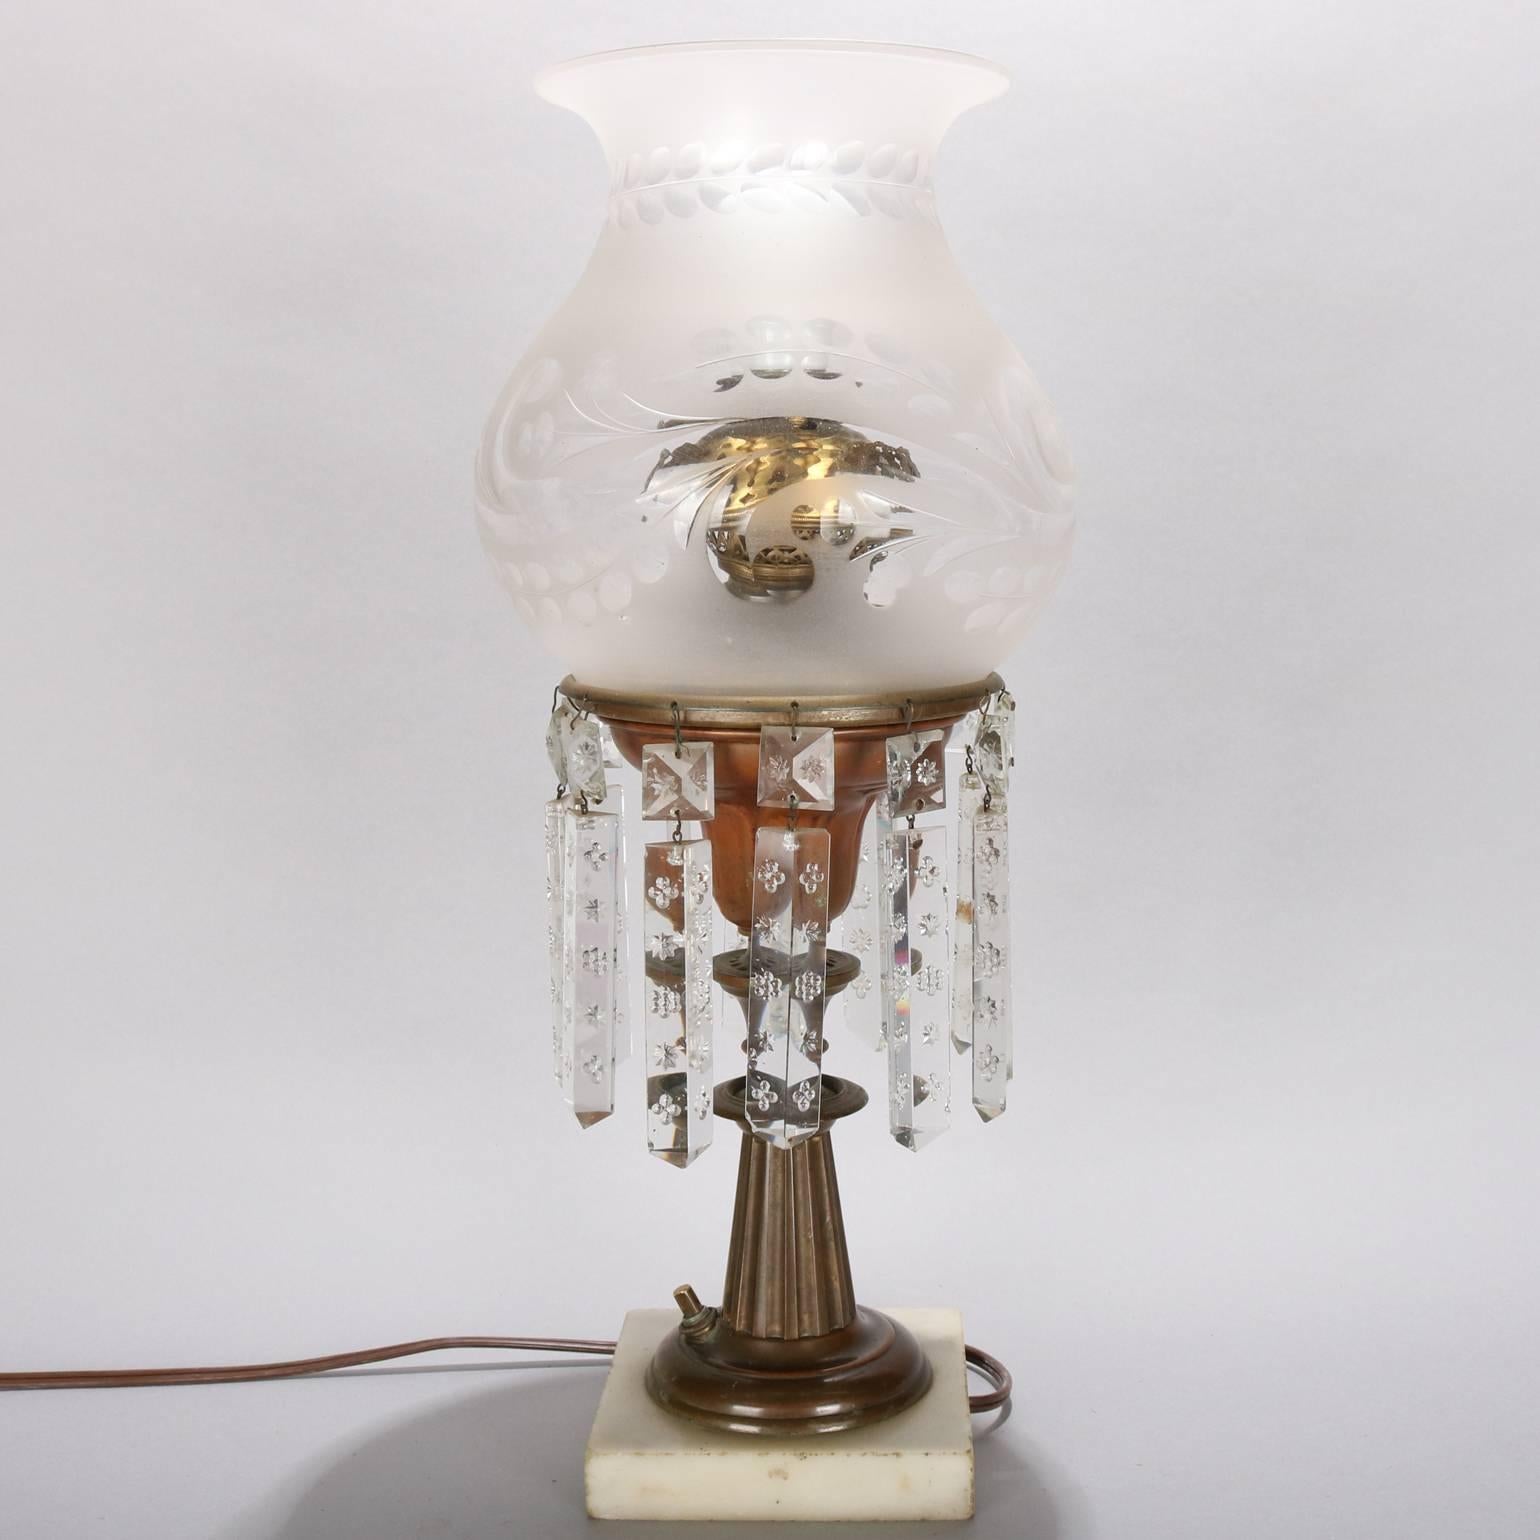 American Antique Brass, Crystal & Marble Electrified Solar Table Lamp, The Arctic MB Co.